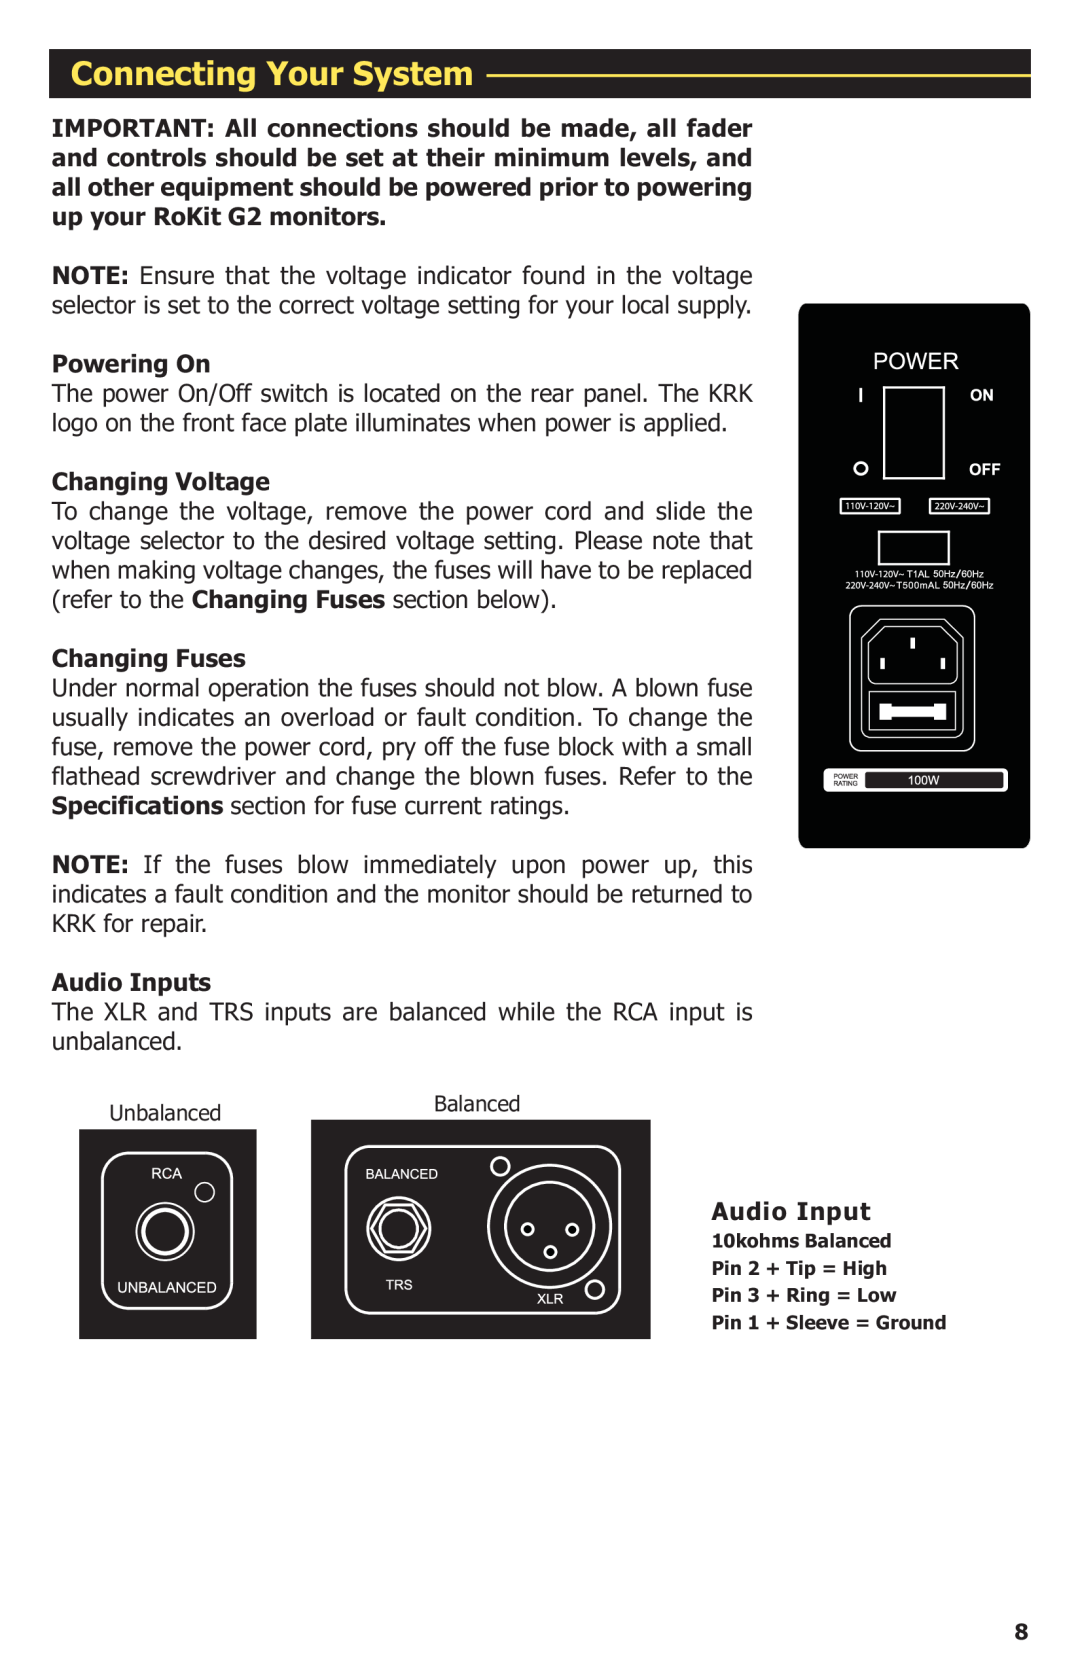 KRK G2 manual Connecting Your System, Powering On, Changing Voltage, Changing Fuses, Audio Inputs 